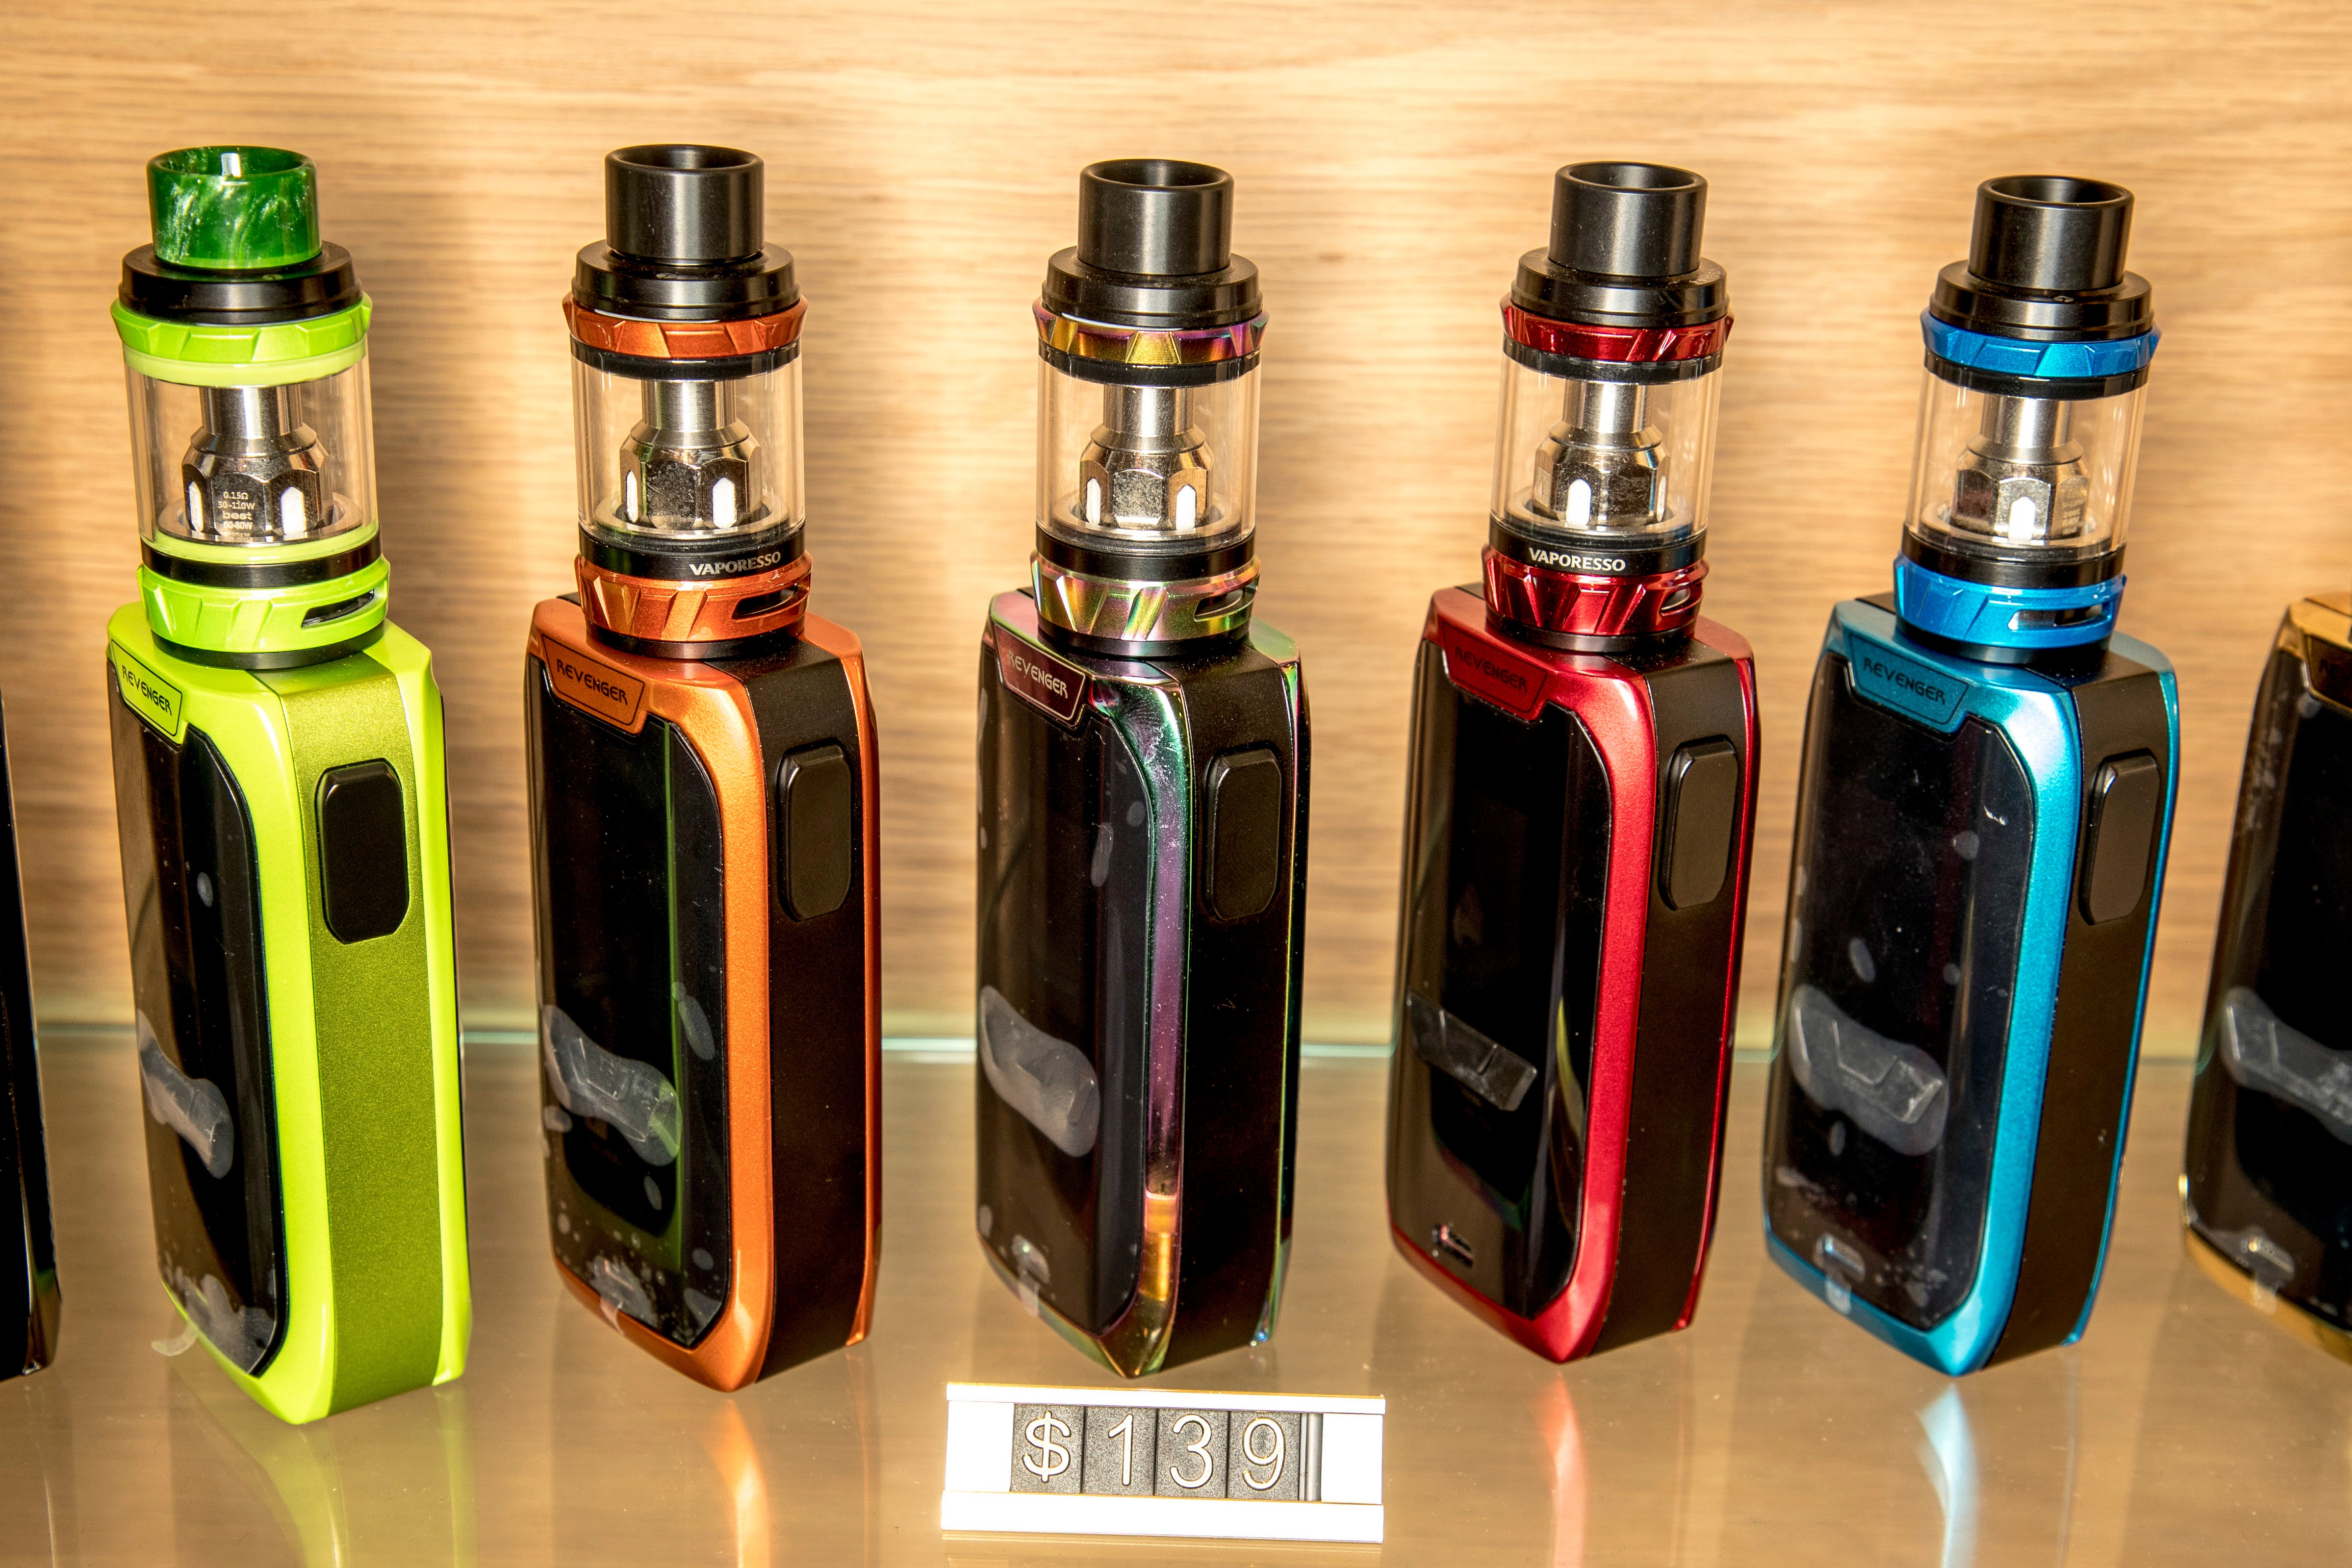 A row of vapes in an Auckland store